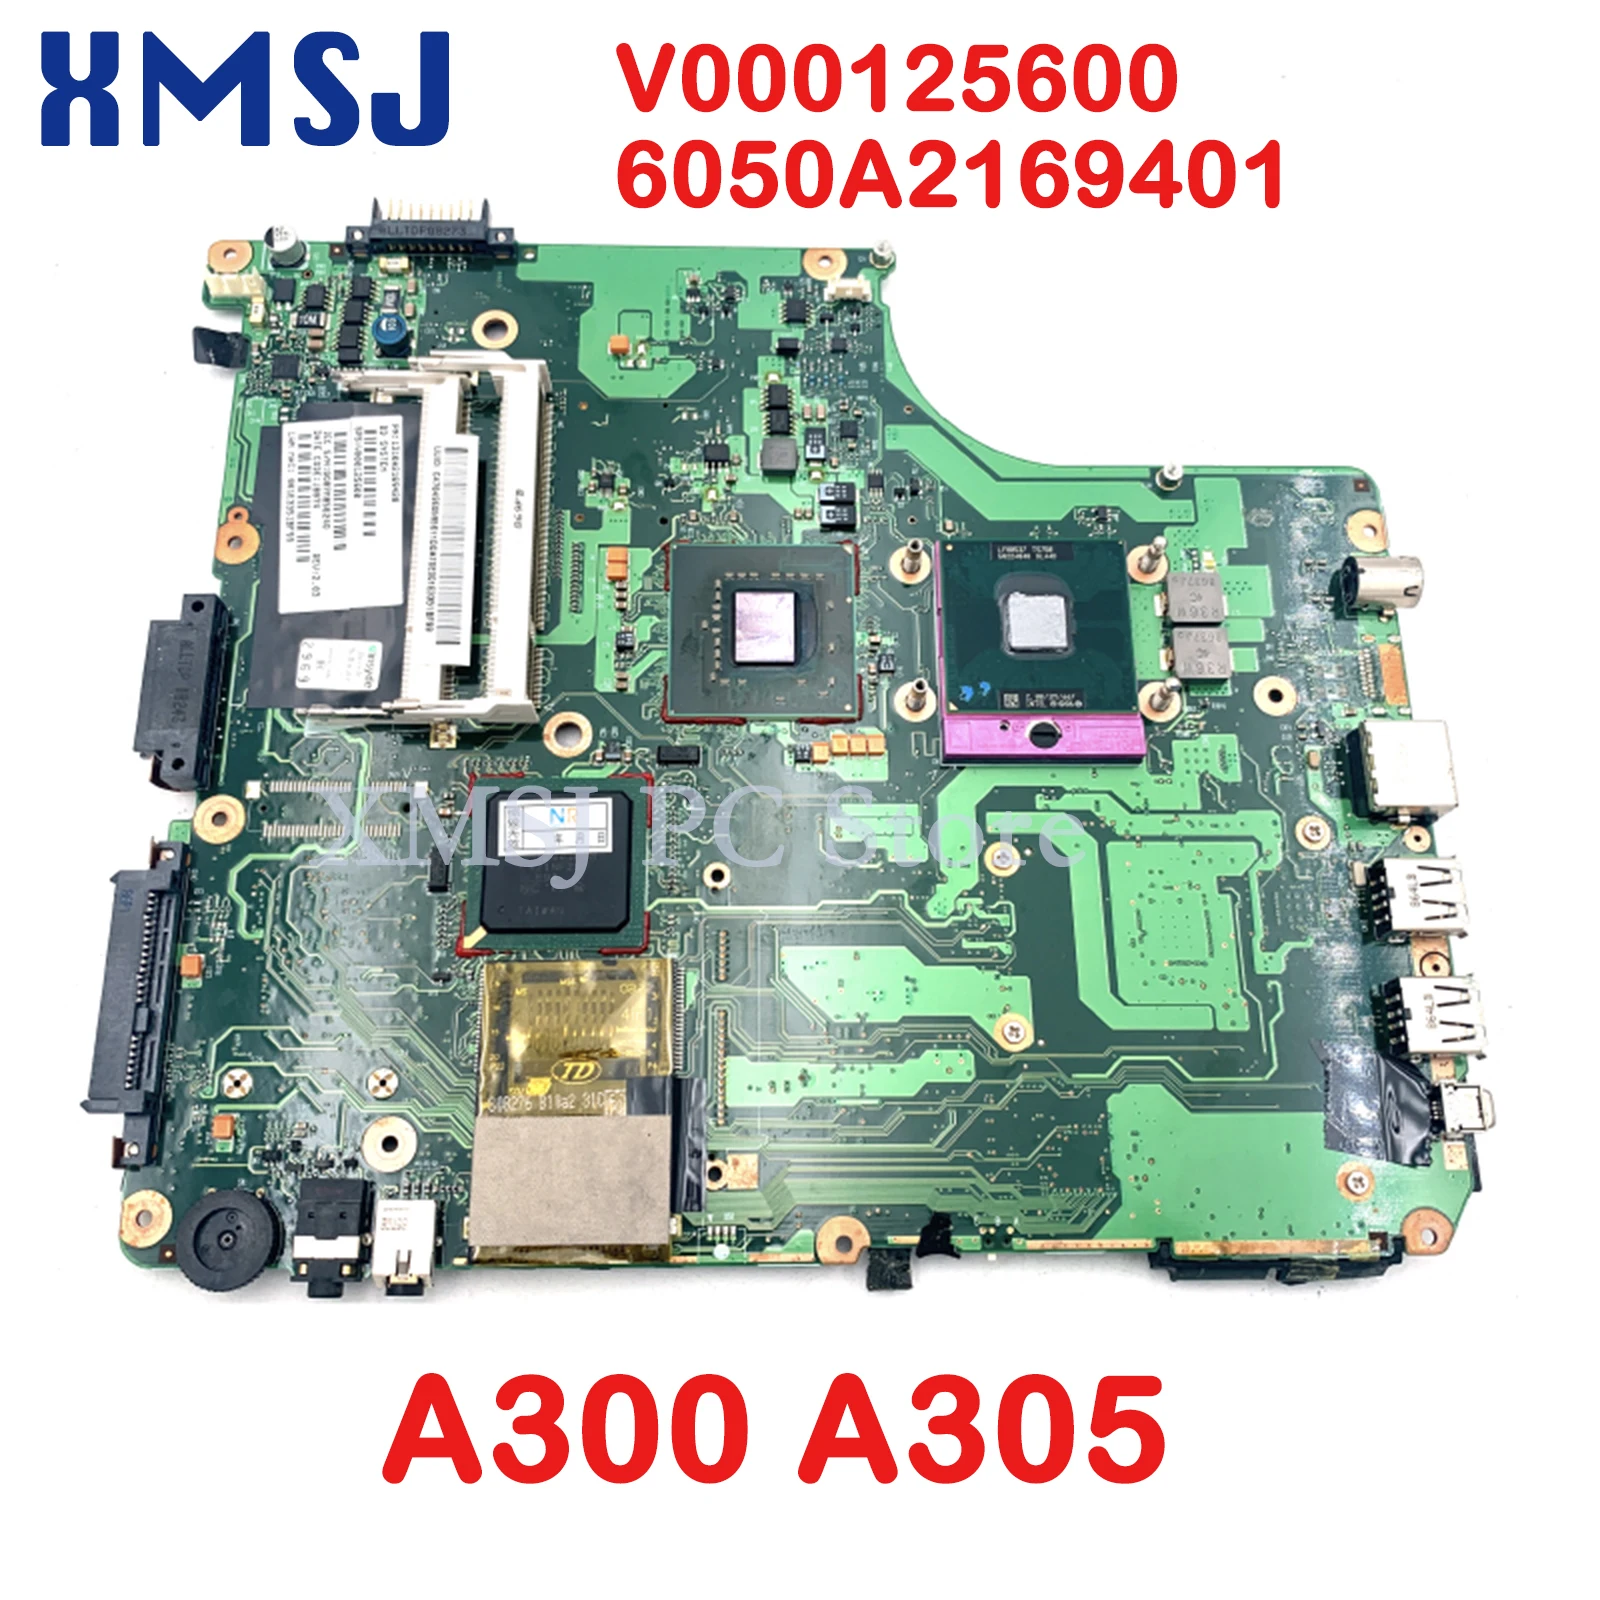 XMSJ V000125600 6050A2169401 Laptop Motherboard For Toshiba Satellite Satellite A300 A305 MAIN BOARD DDR2 free CPU